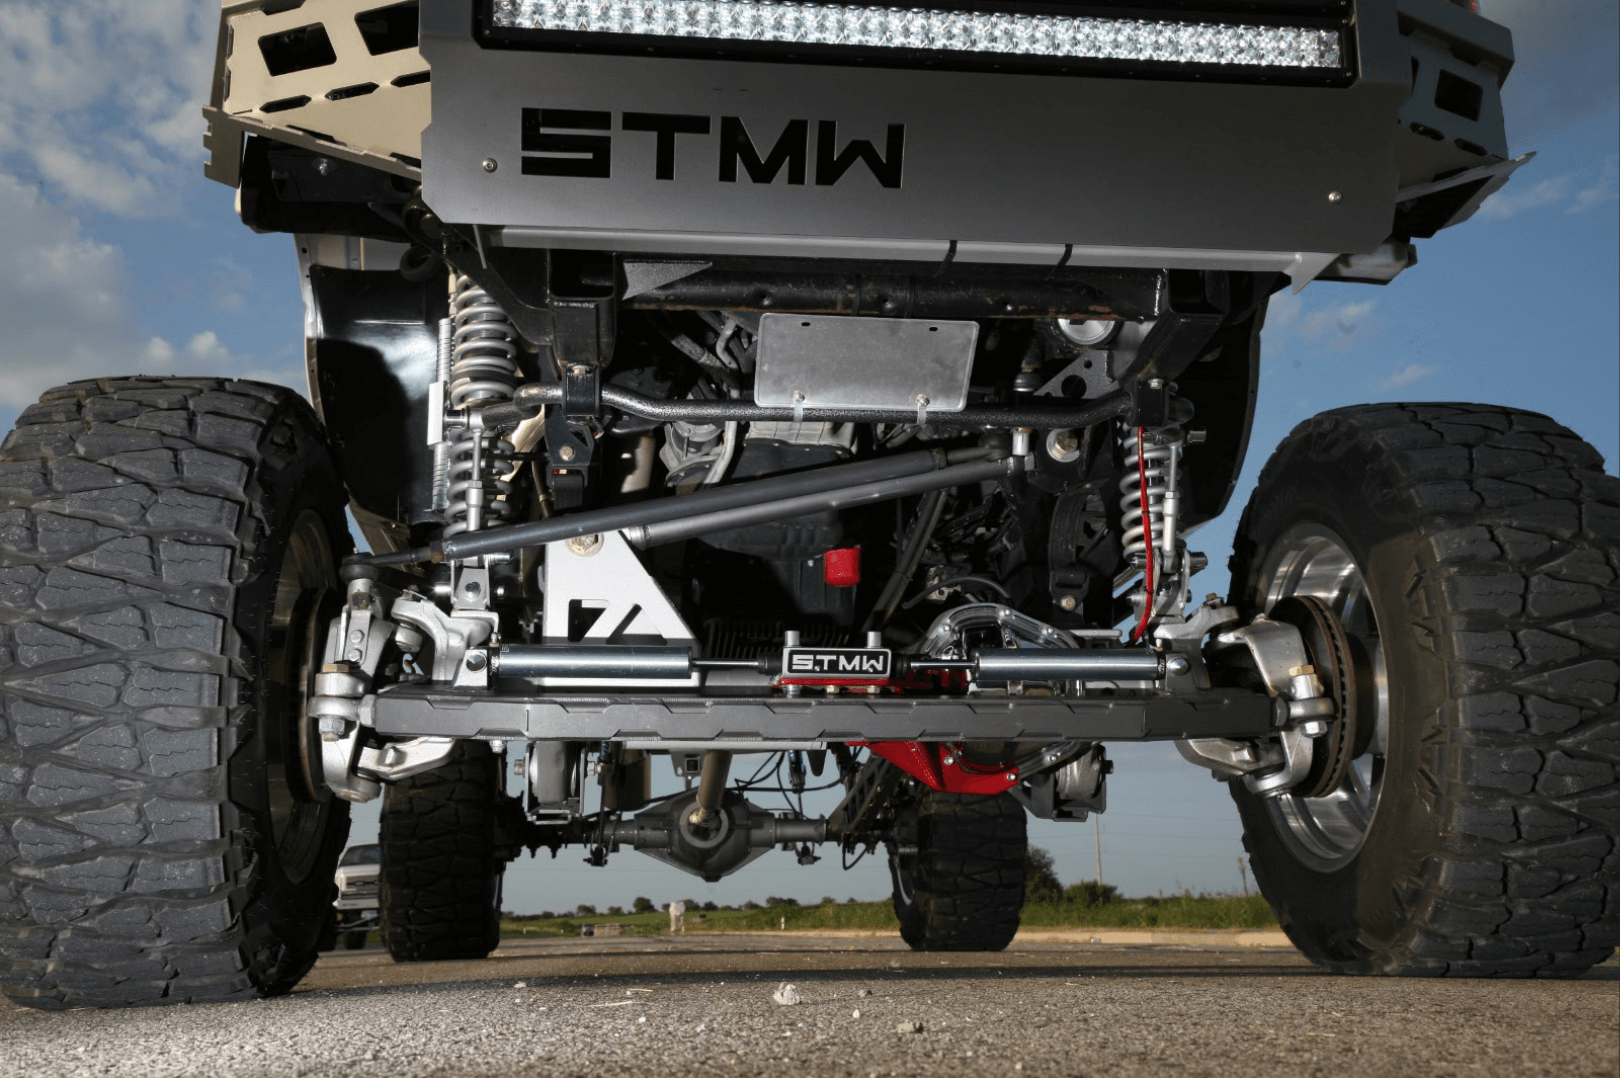 The Naivars put a lot of work into the front suspension and steering gear to ensure the Silverado would steer accurately, even with a solid front axle and a 12-inch lift. "I like things to work right," explains brother Brandon.